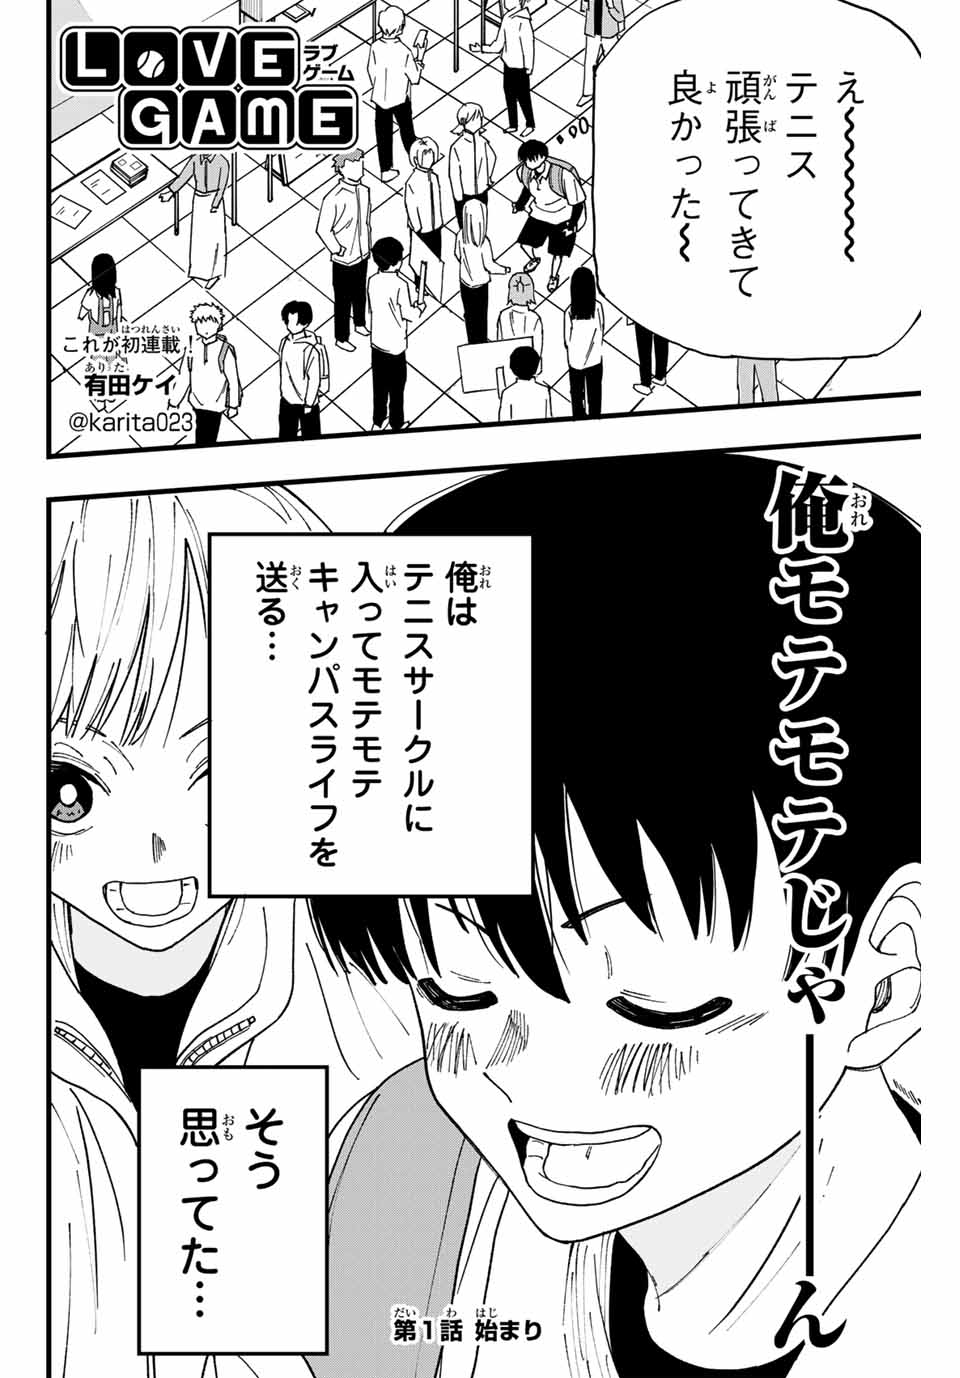 LoVE GAME 第1.1話 - Page 1